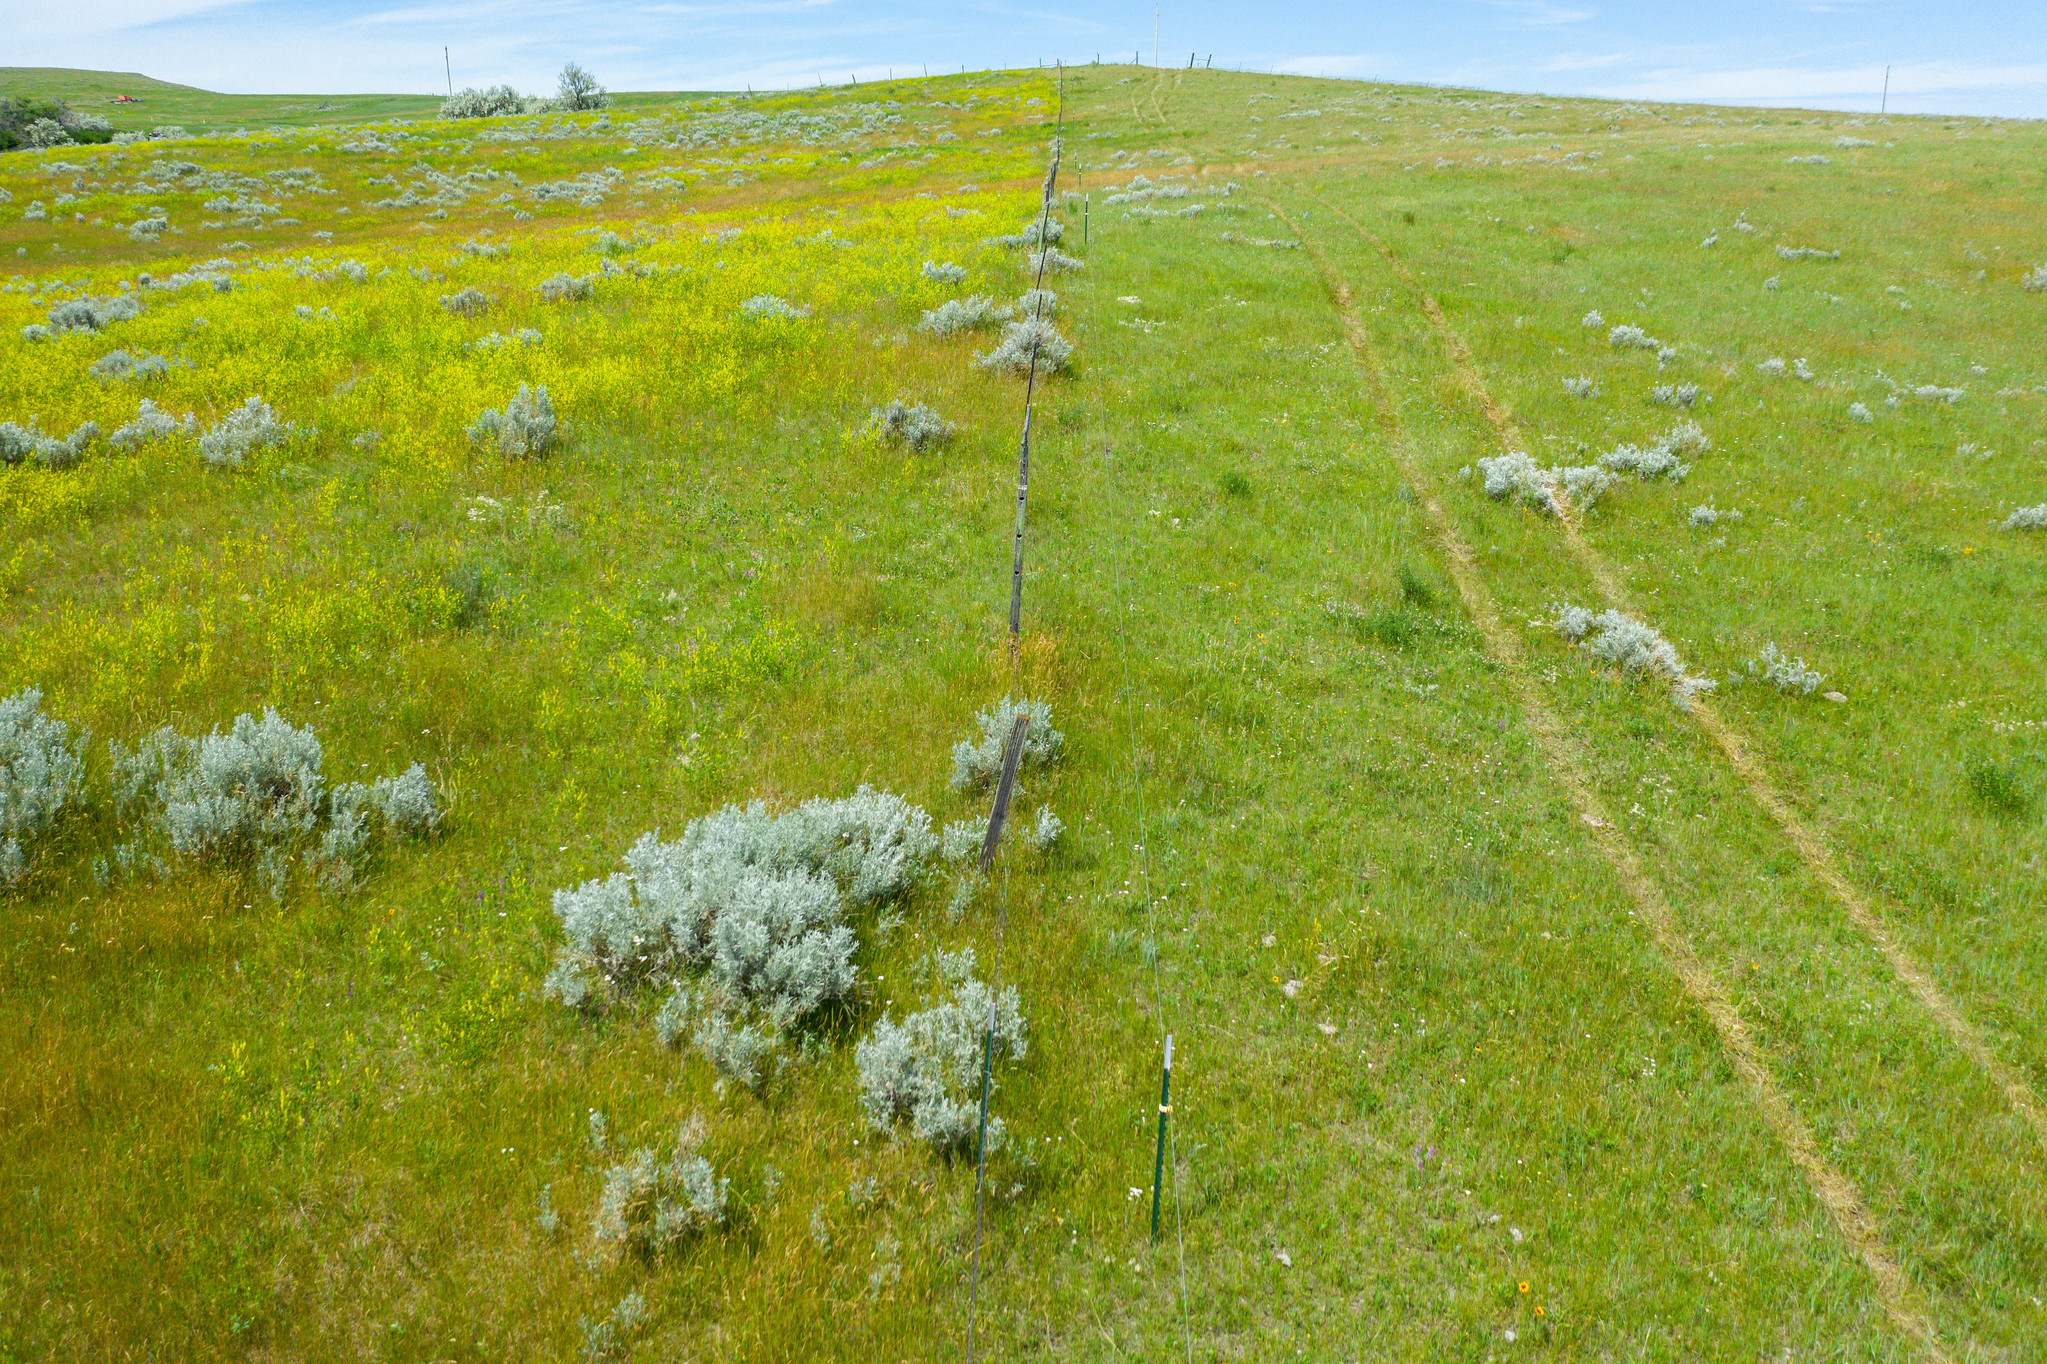 A fence divides two pastures. The pasture on the left has more diverse plants. The pasture on the right is shorter and less diverse.